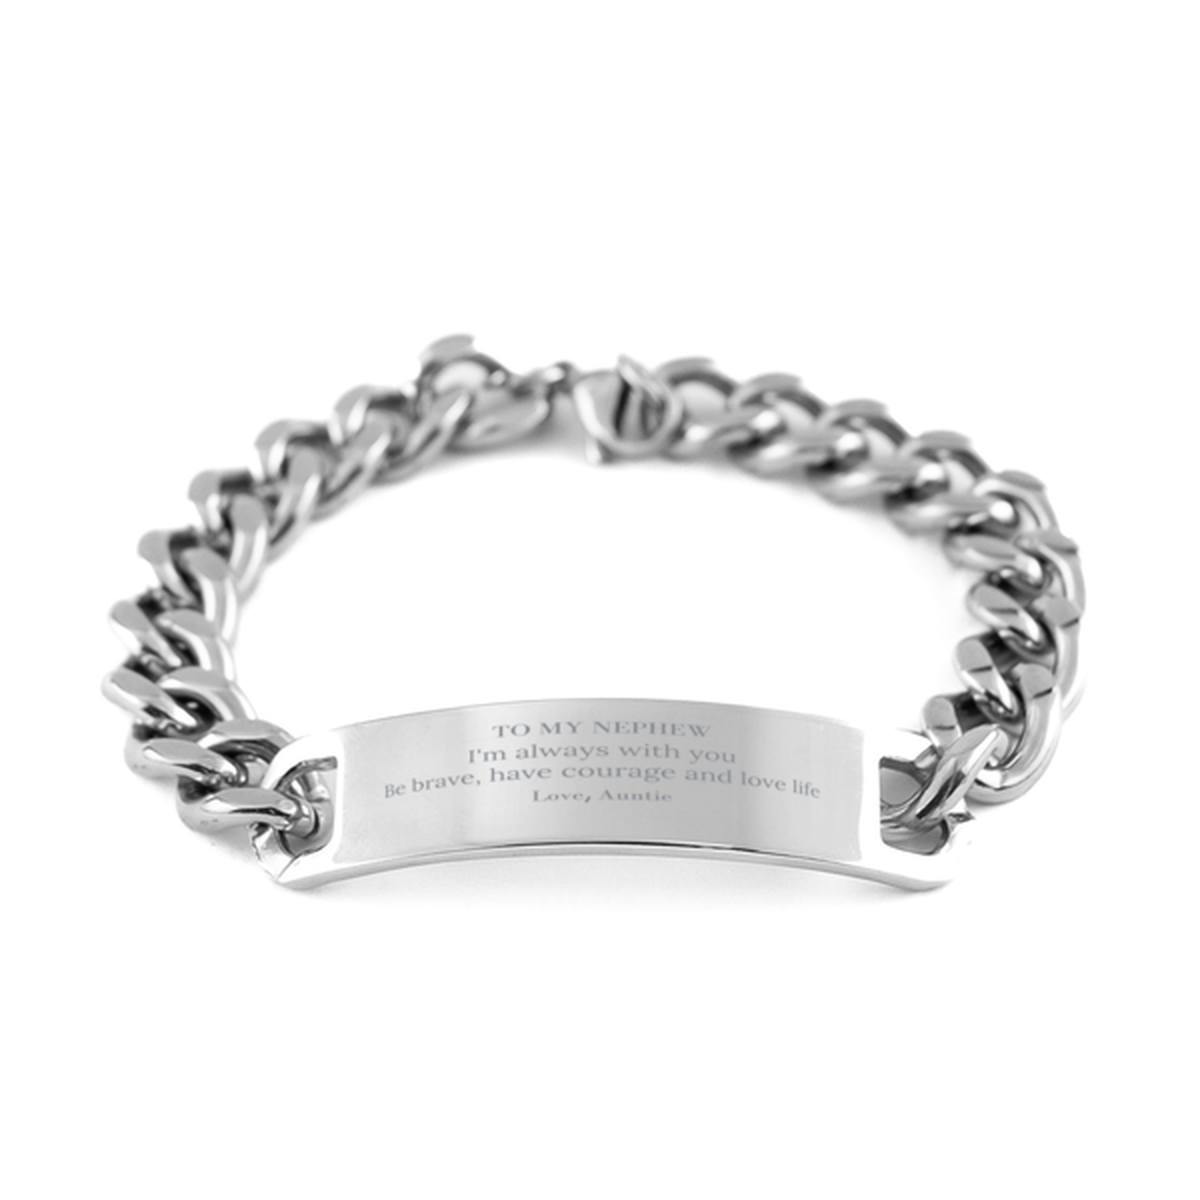 To My Nephew Gifts from Auntie, Unique Cuban Chain Stainless Steel Bracelet Inspirational Christmas Birthday Graduation Gifts for Nephew I'm always with you. Be brave, have courage and love life. Love, Auntie